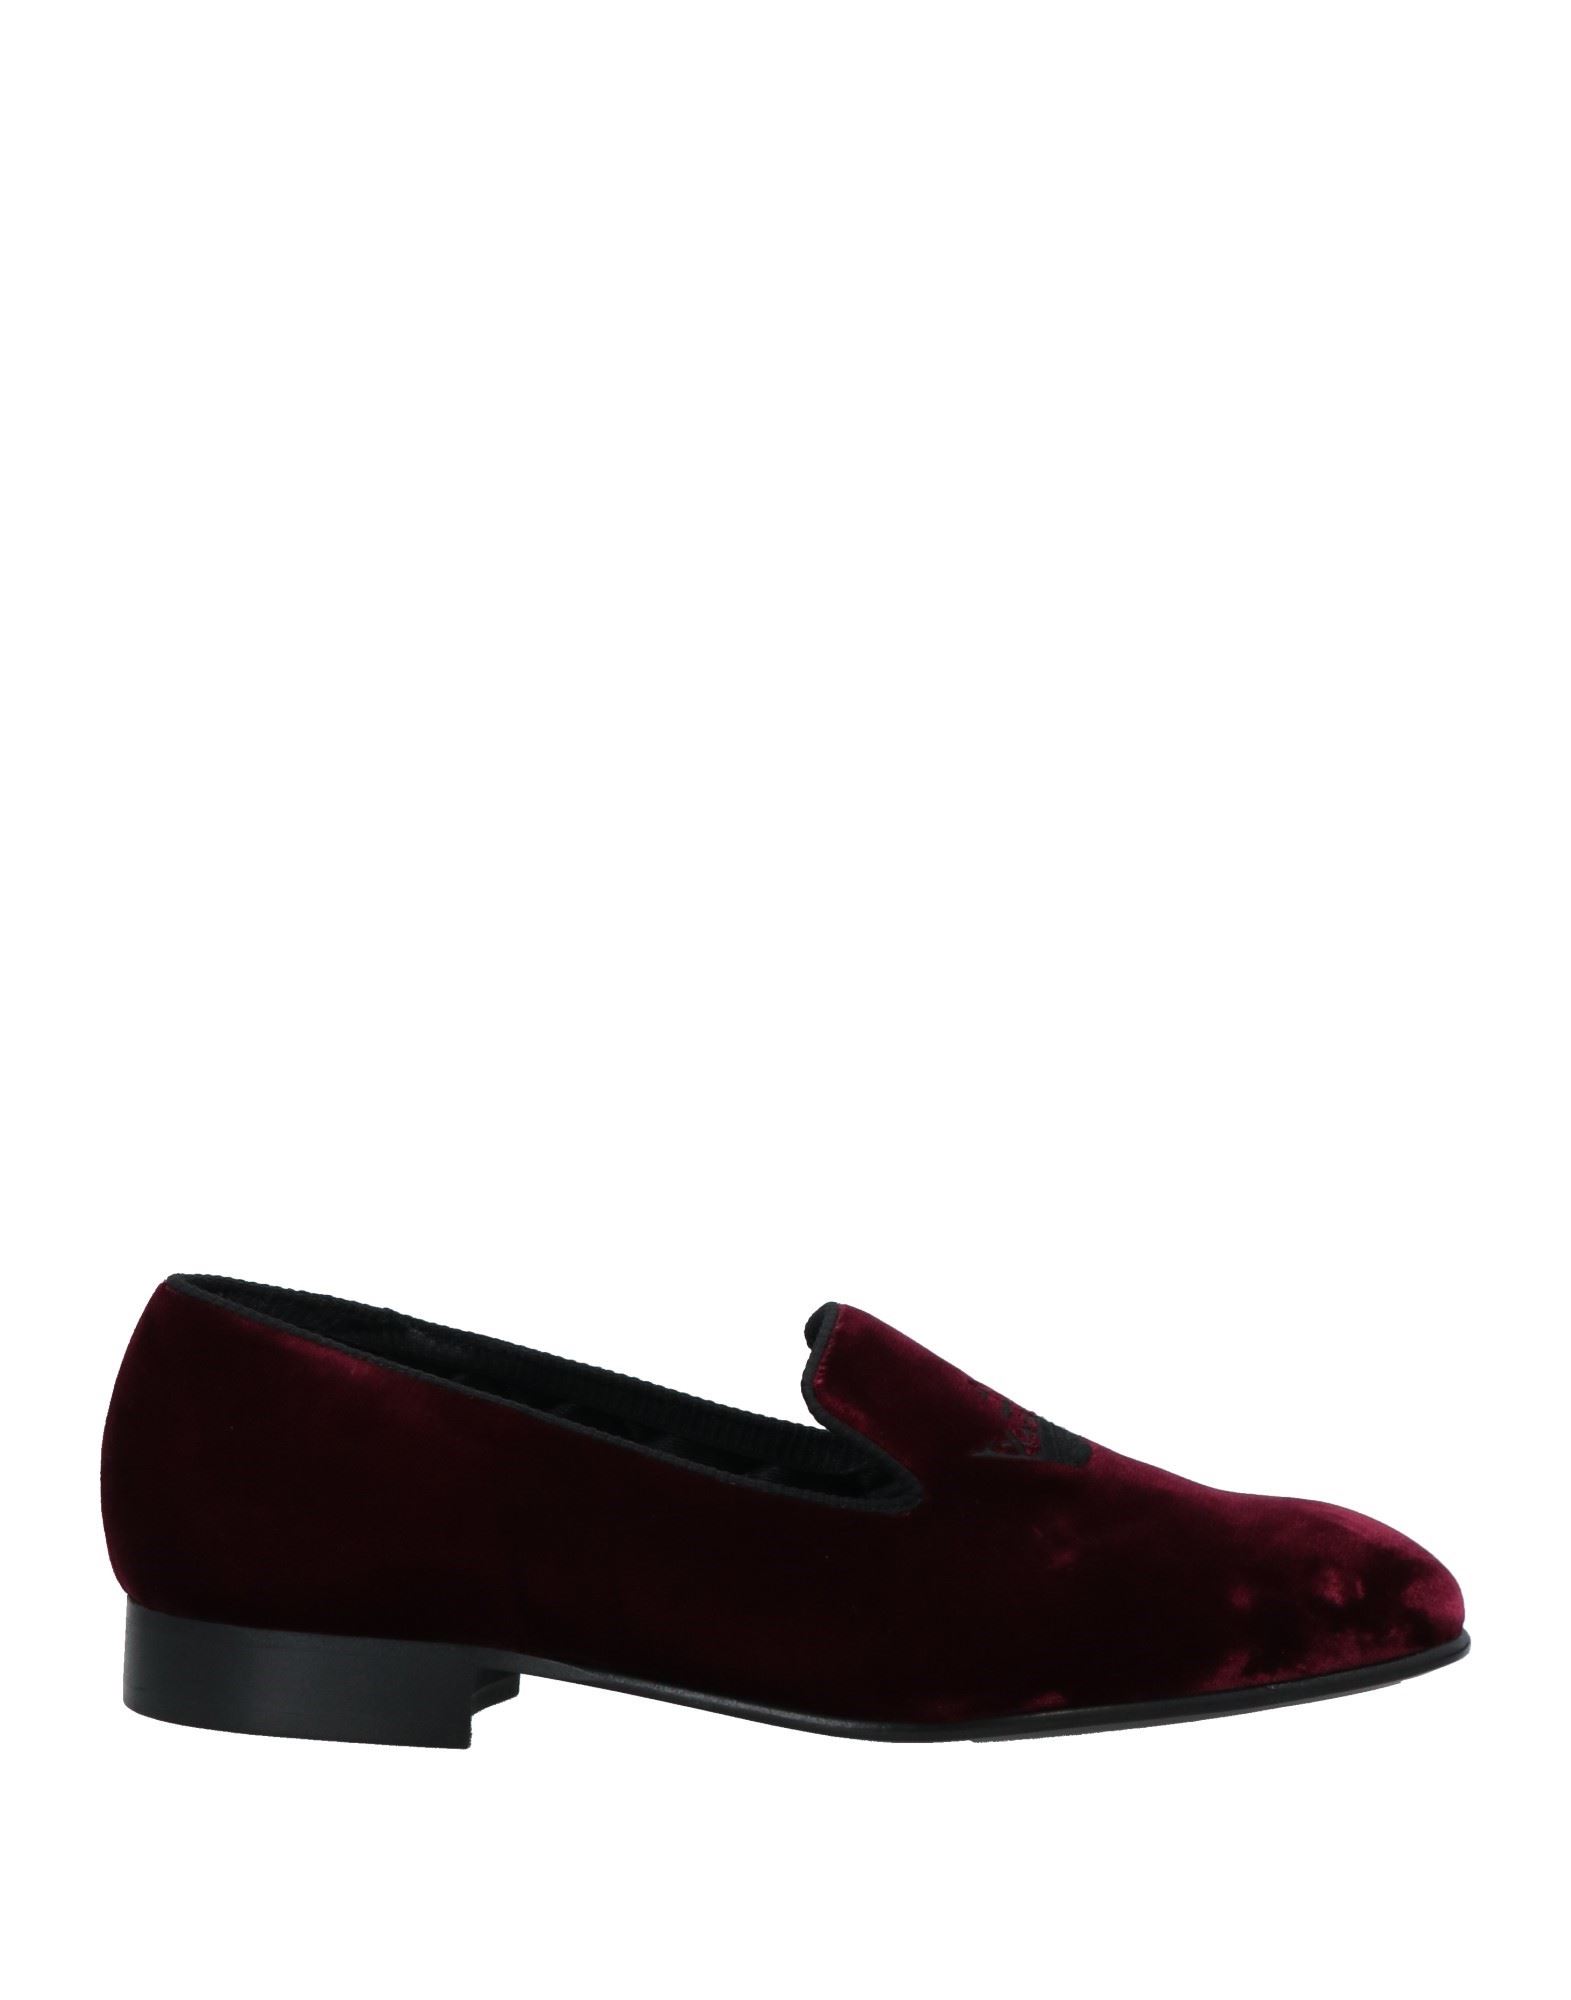 Church's Man Loafers Burgundy Size 7.5 Textile Fibers In Red